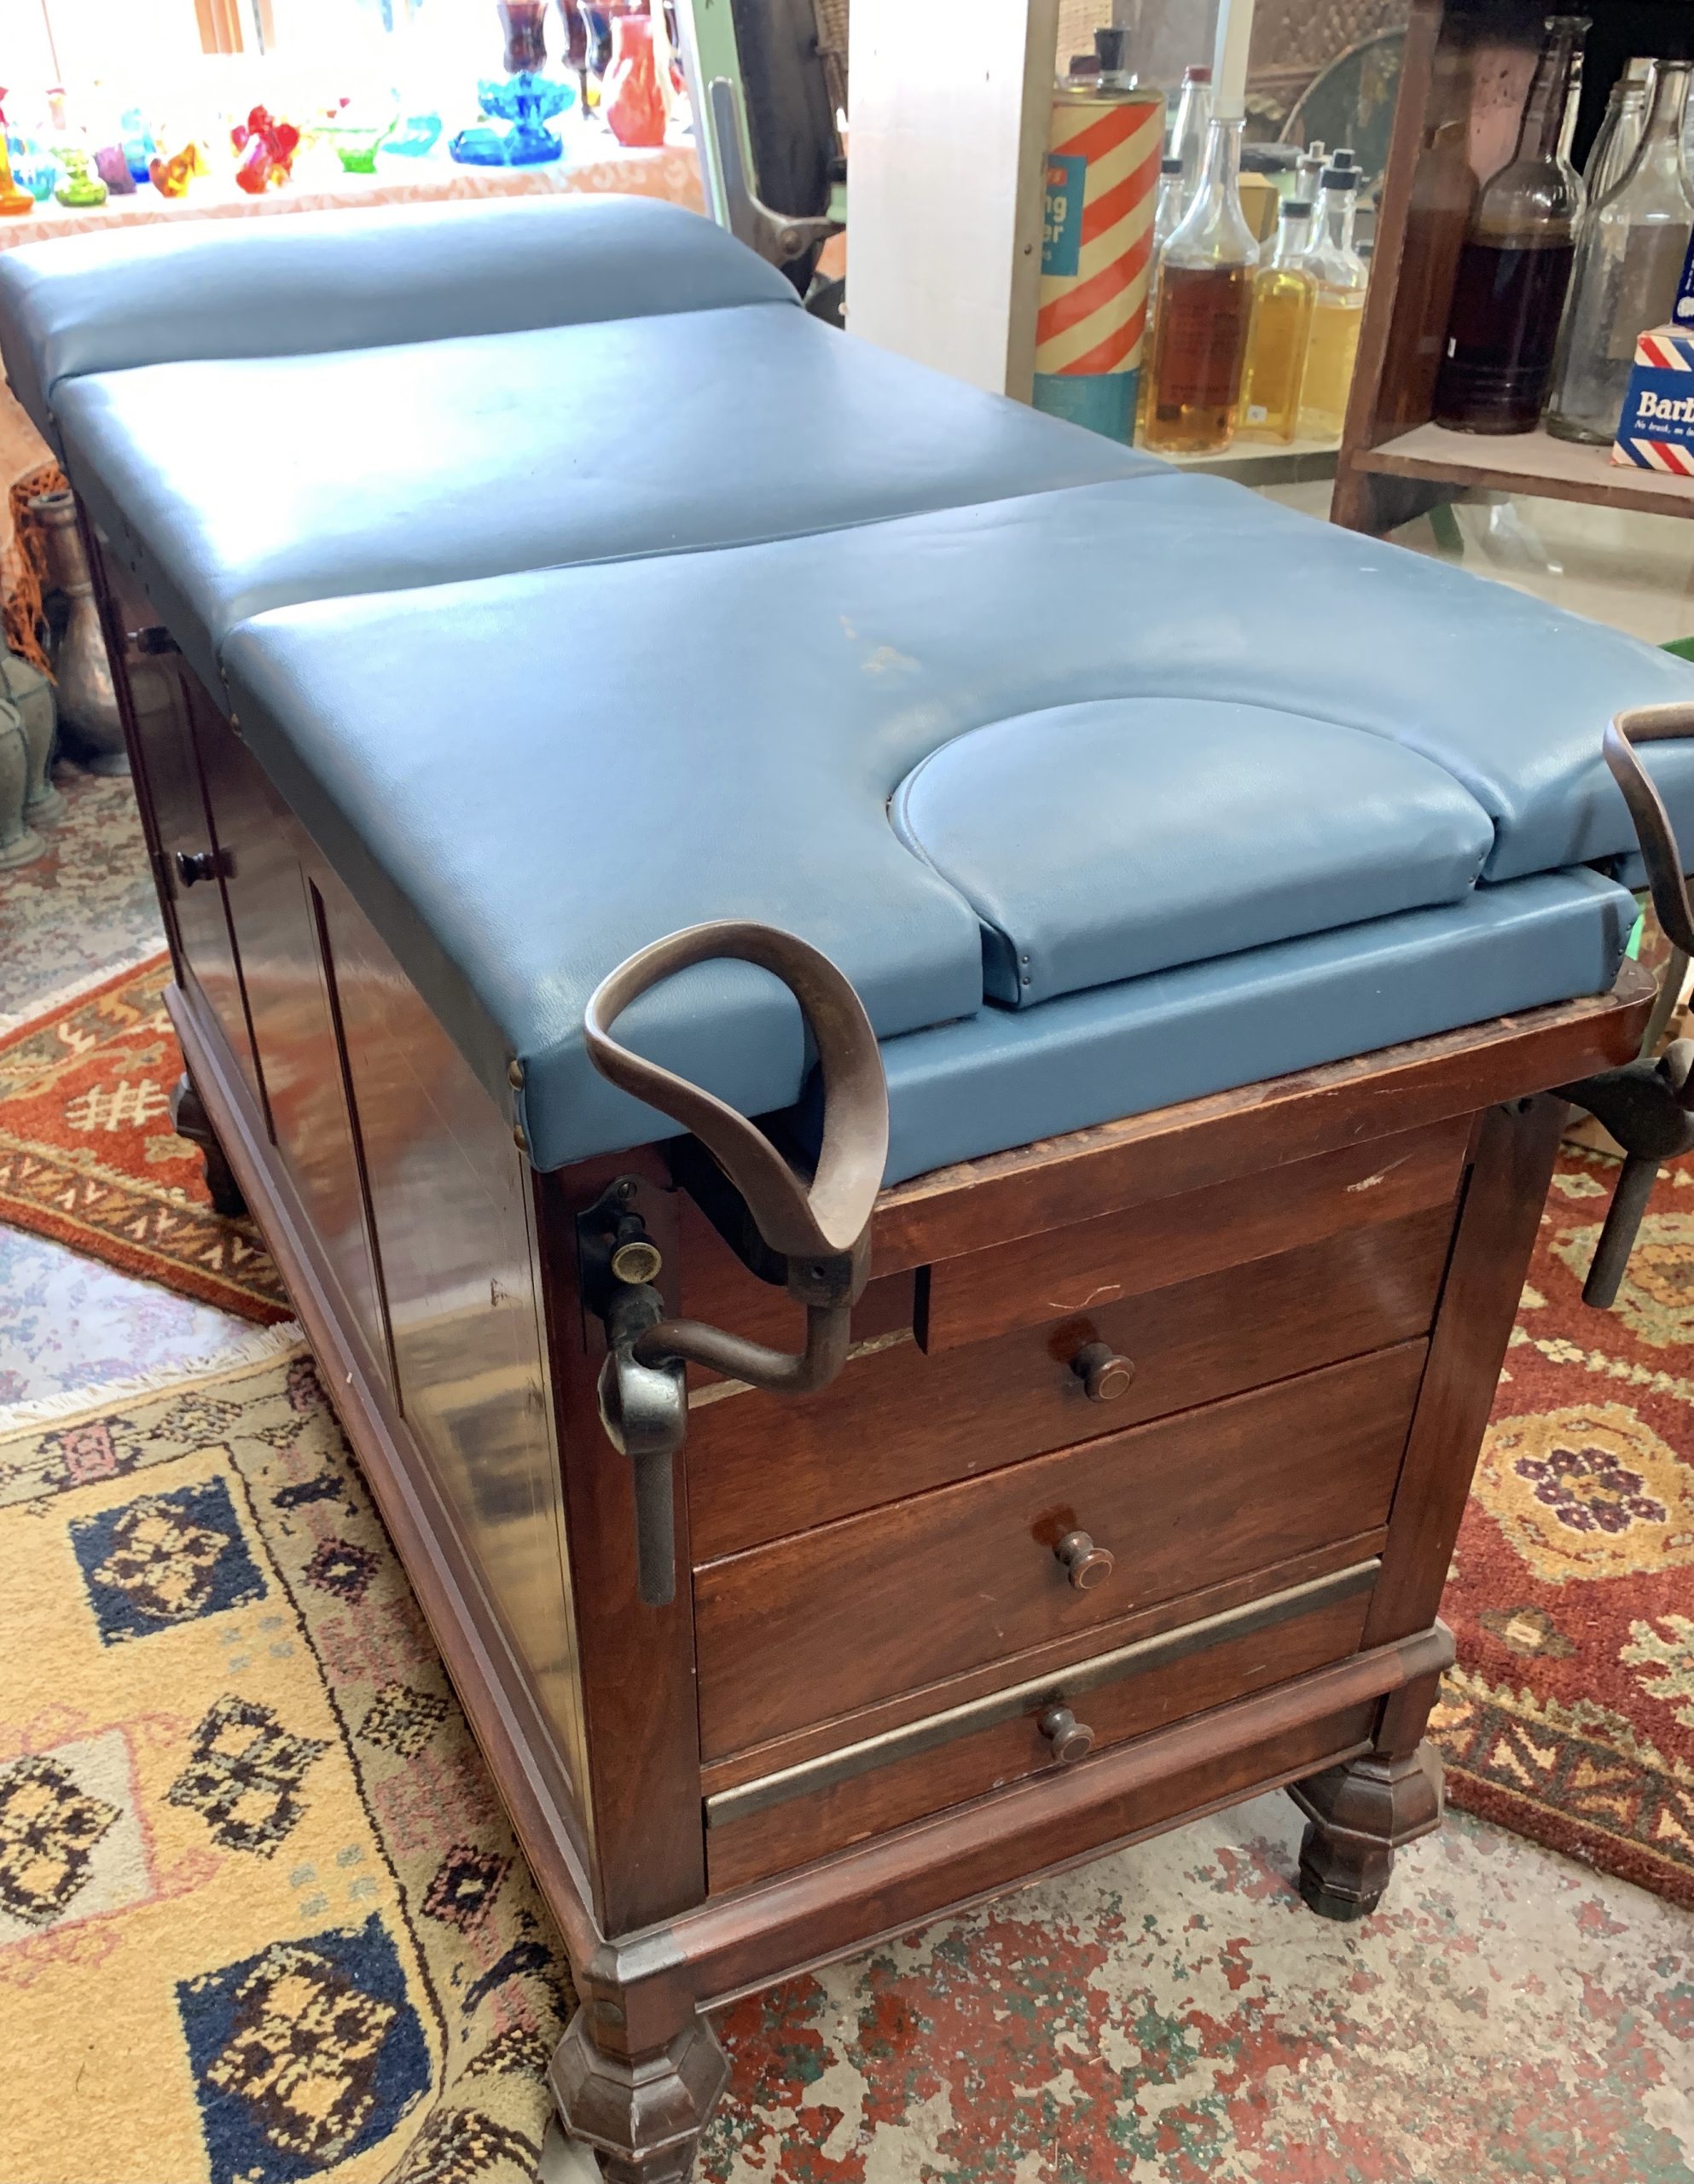 Vintage Medical Exam Table jo guest